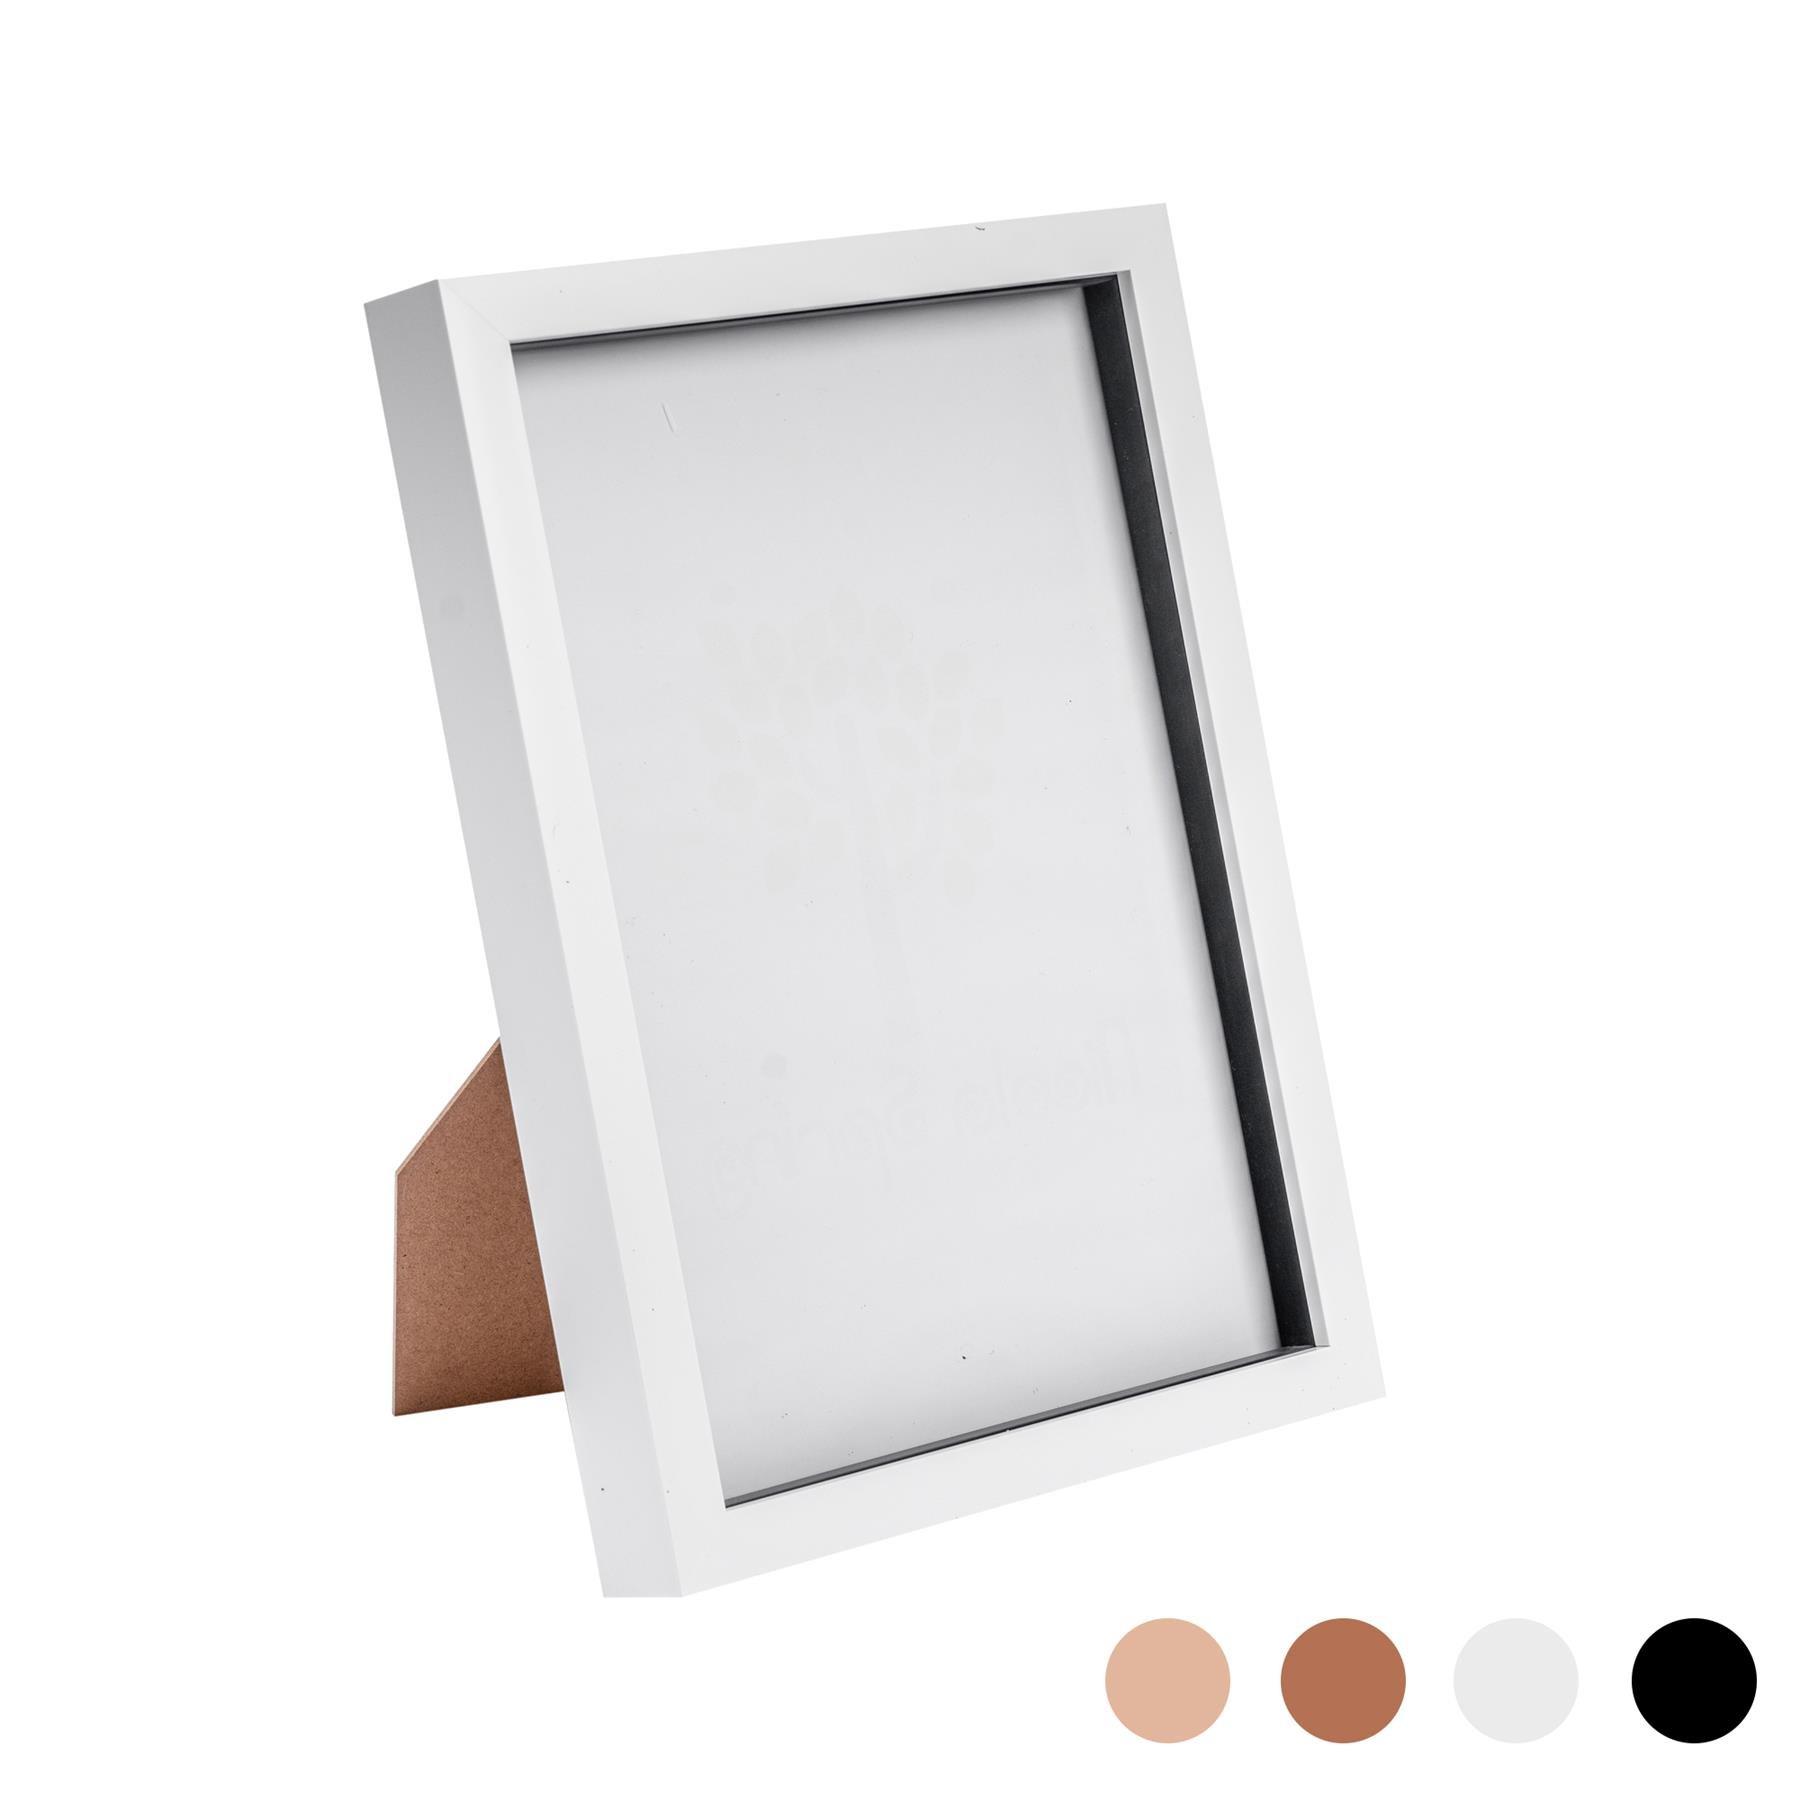 Picture Frame white